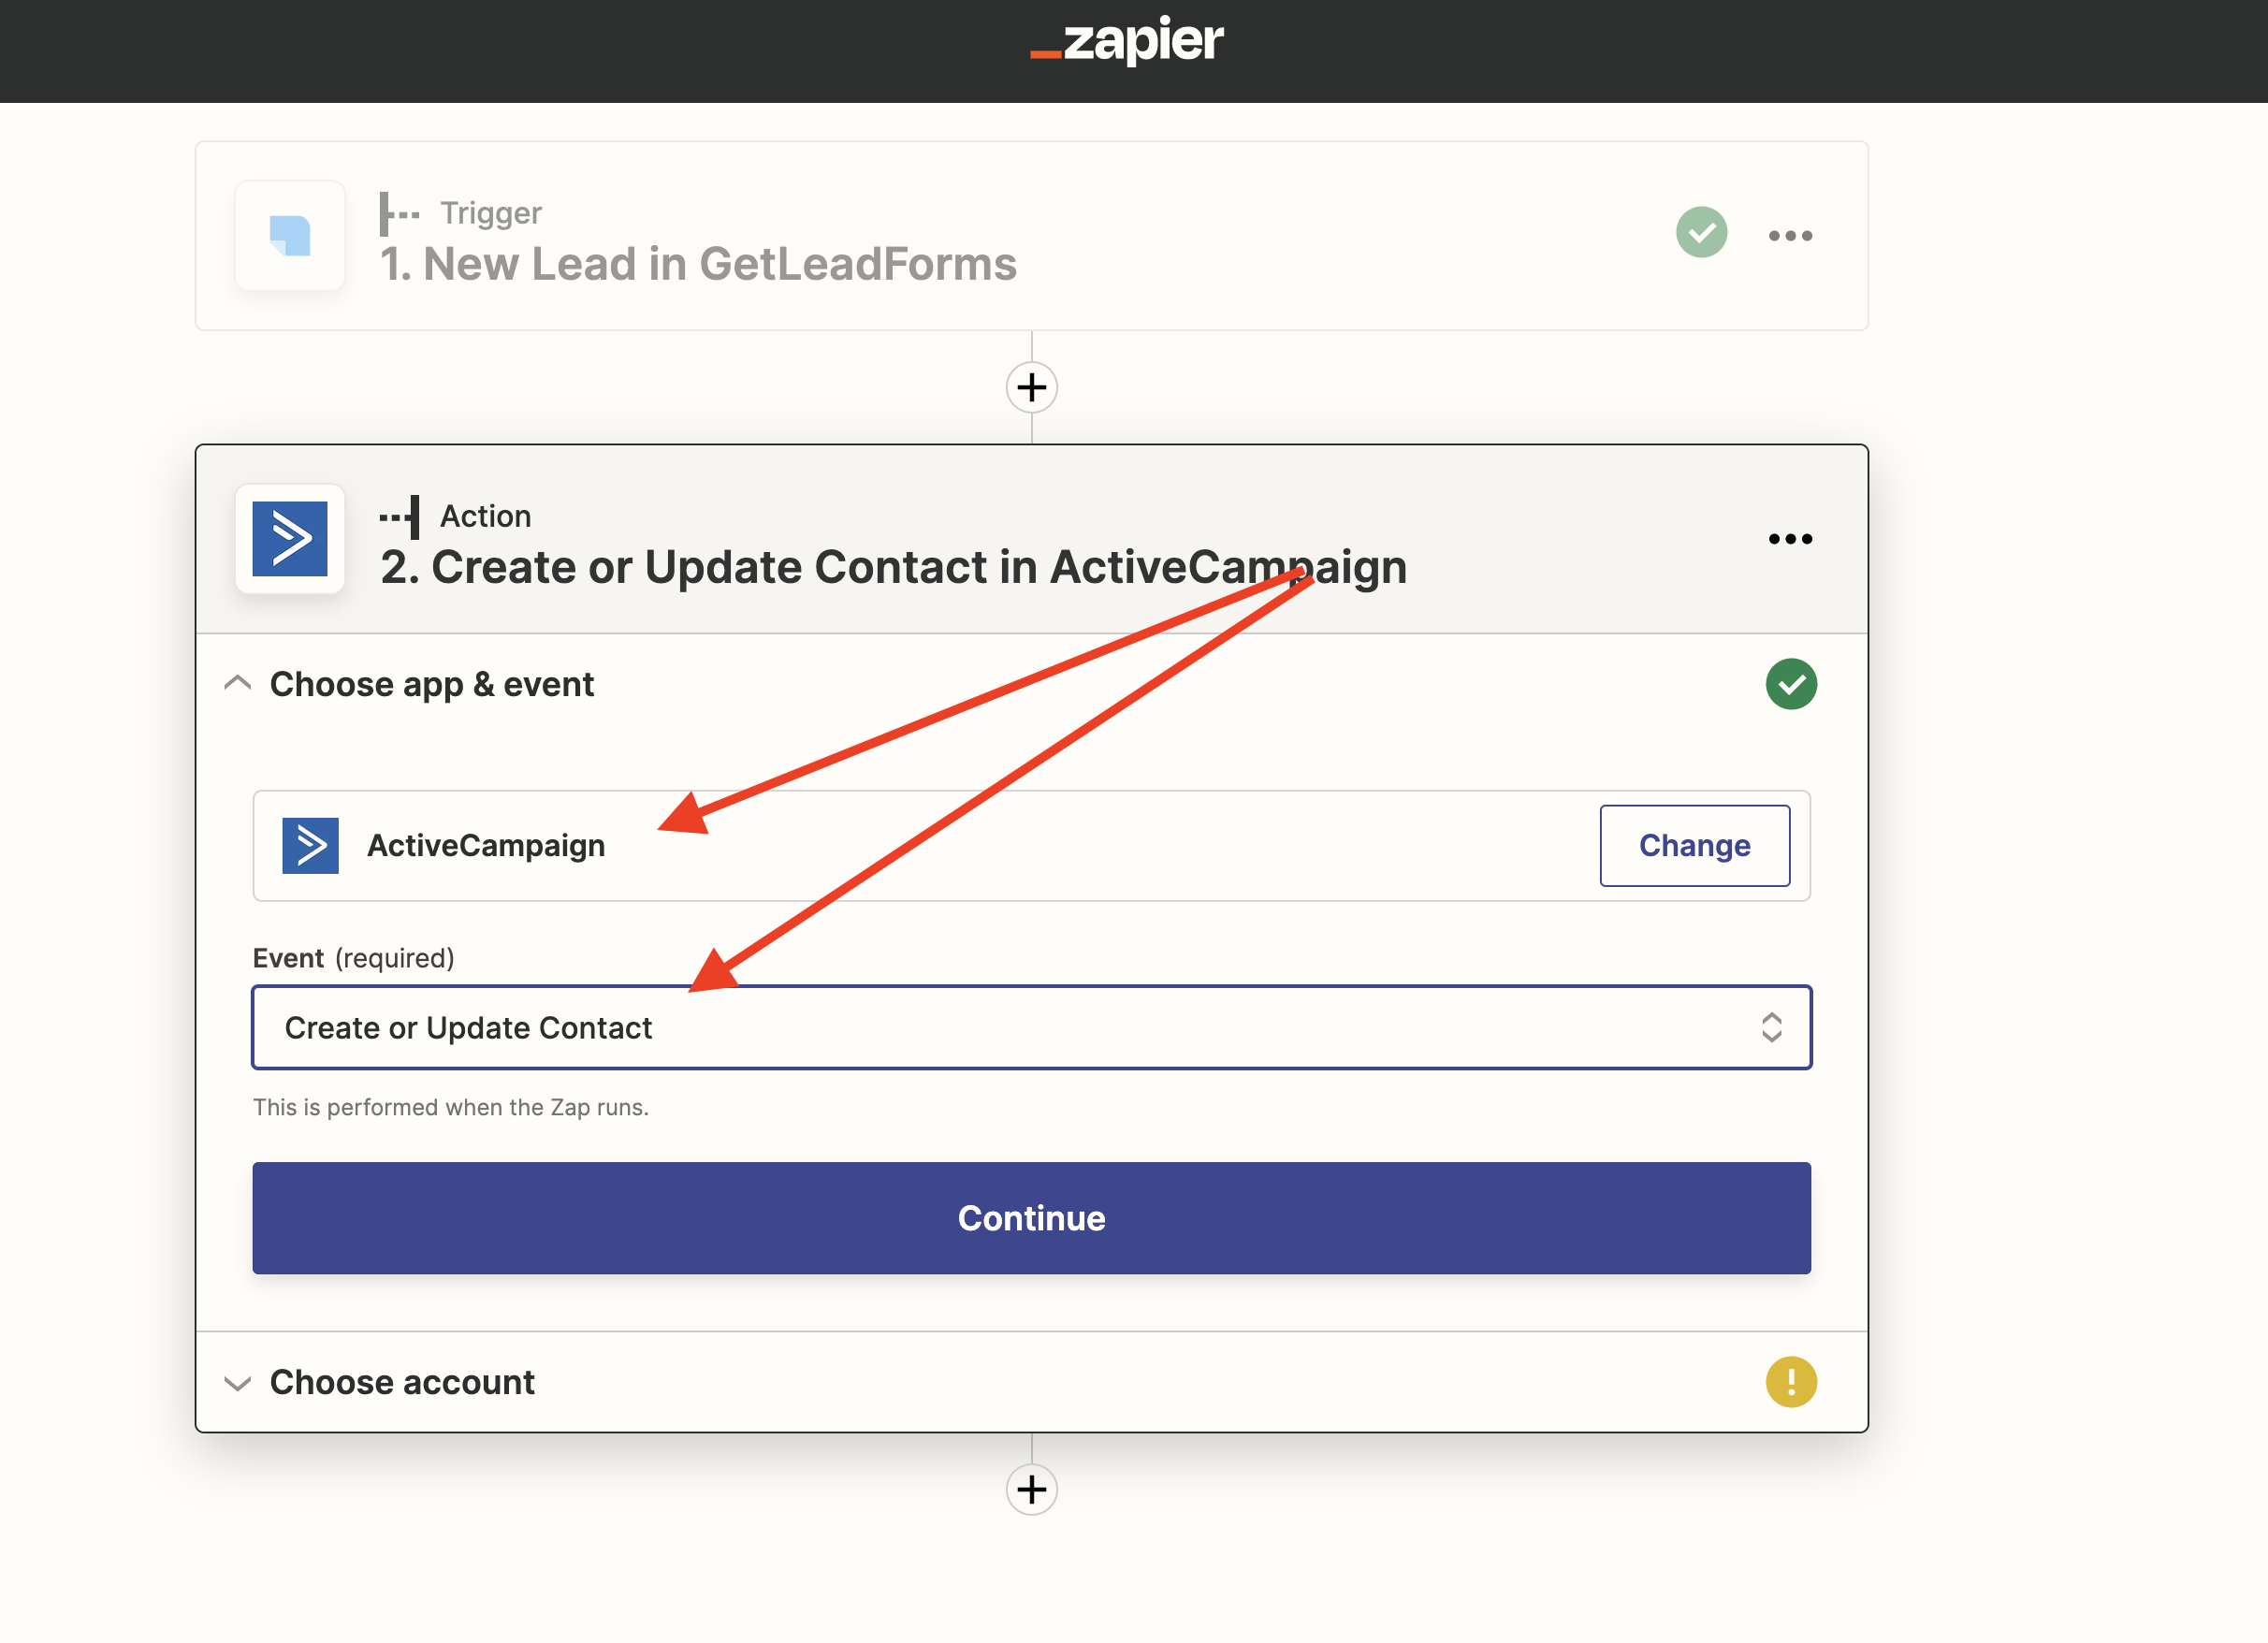 Add ActiveCampaign as an action in Zapier